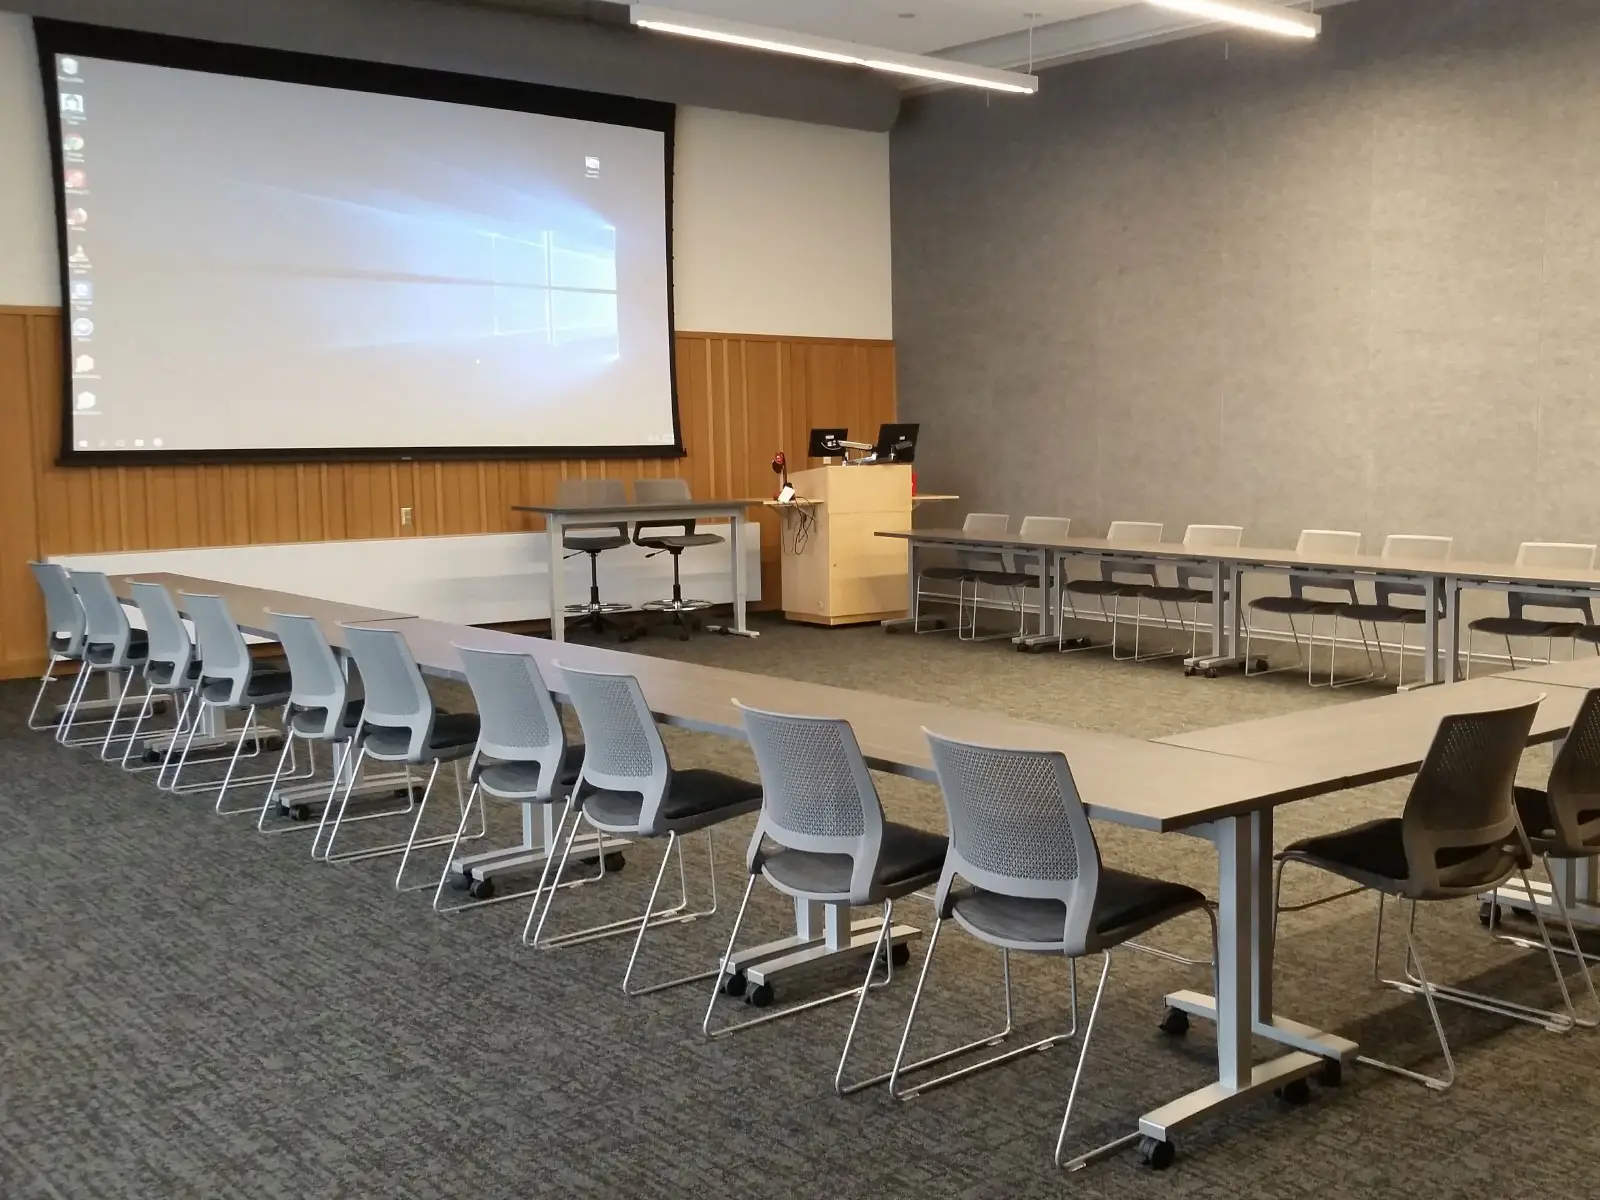 Square-shaped rows of chairs and tables in Harmony Campus community room